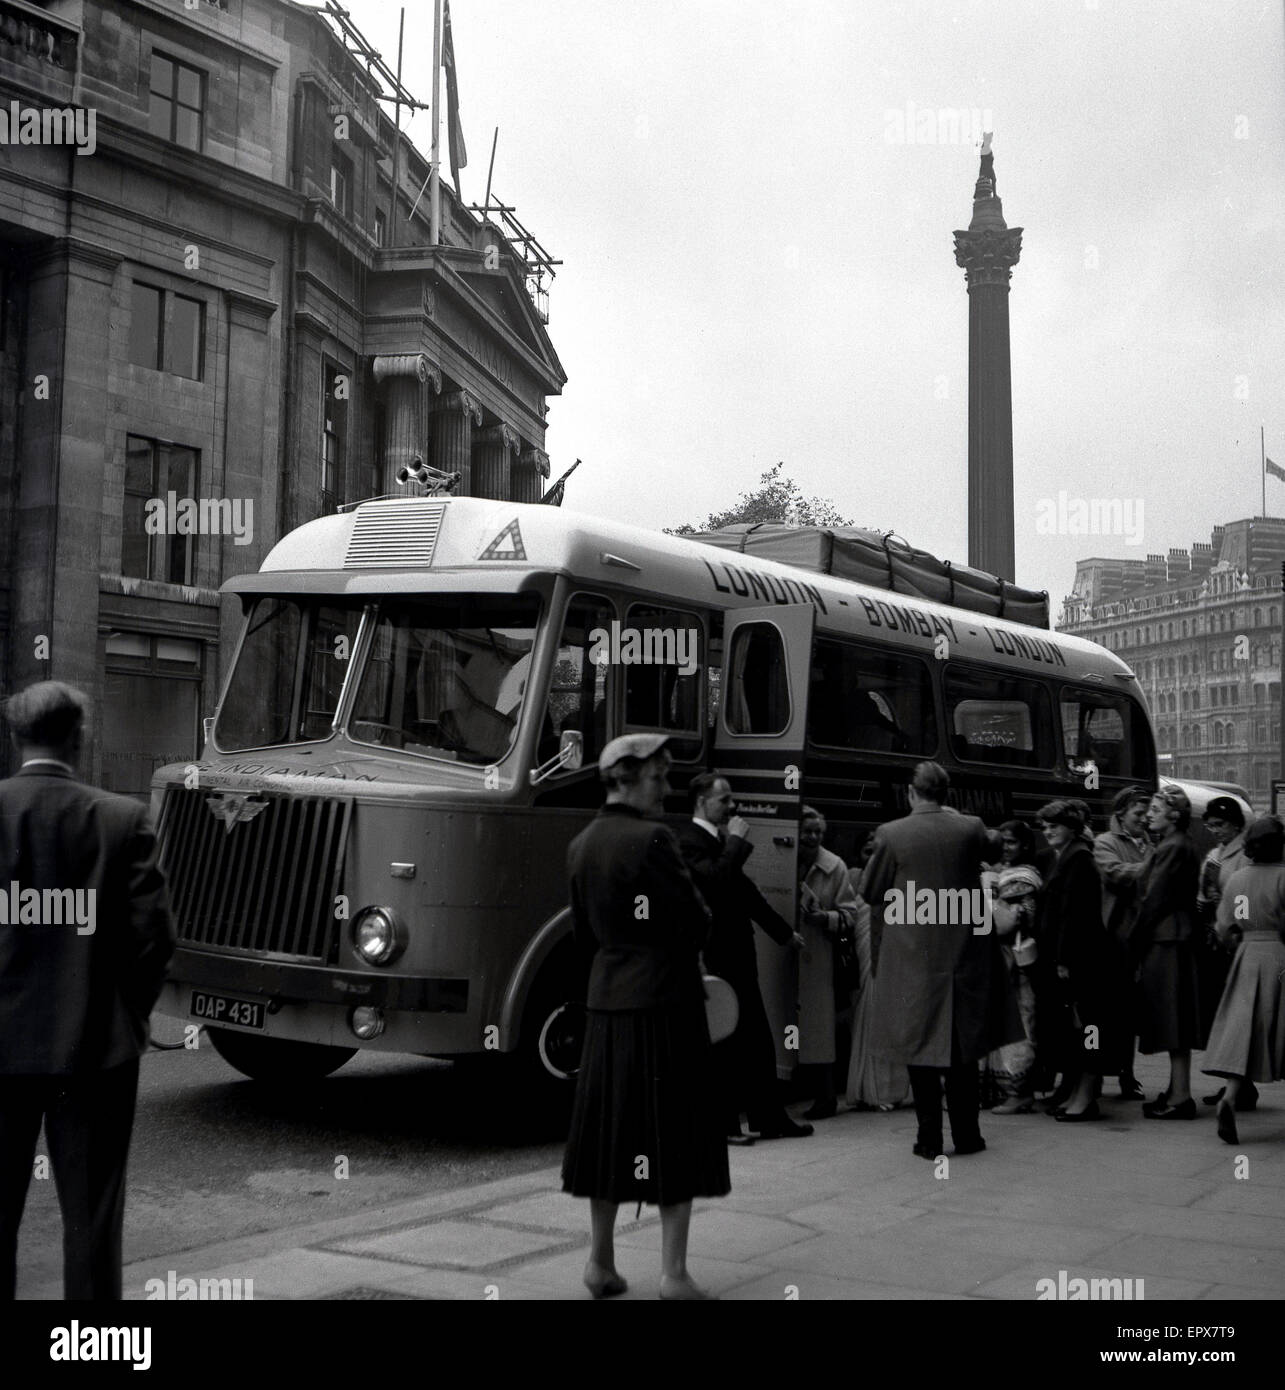 1950s historical, passengers awaiting to board 'The Indiaman', at Trafalgar Square, London, England, UK. A long-distance, trans-continental coach from London to Bombay, India and then back to London, it was the world's longest coach route. Stock Photo